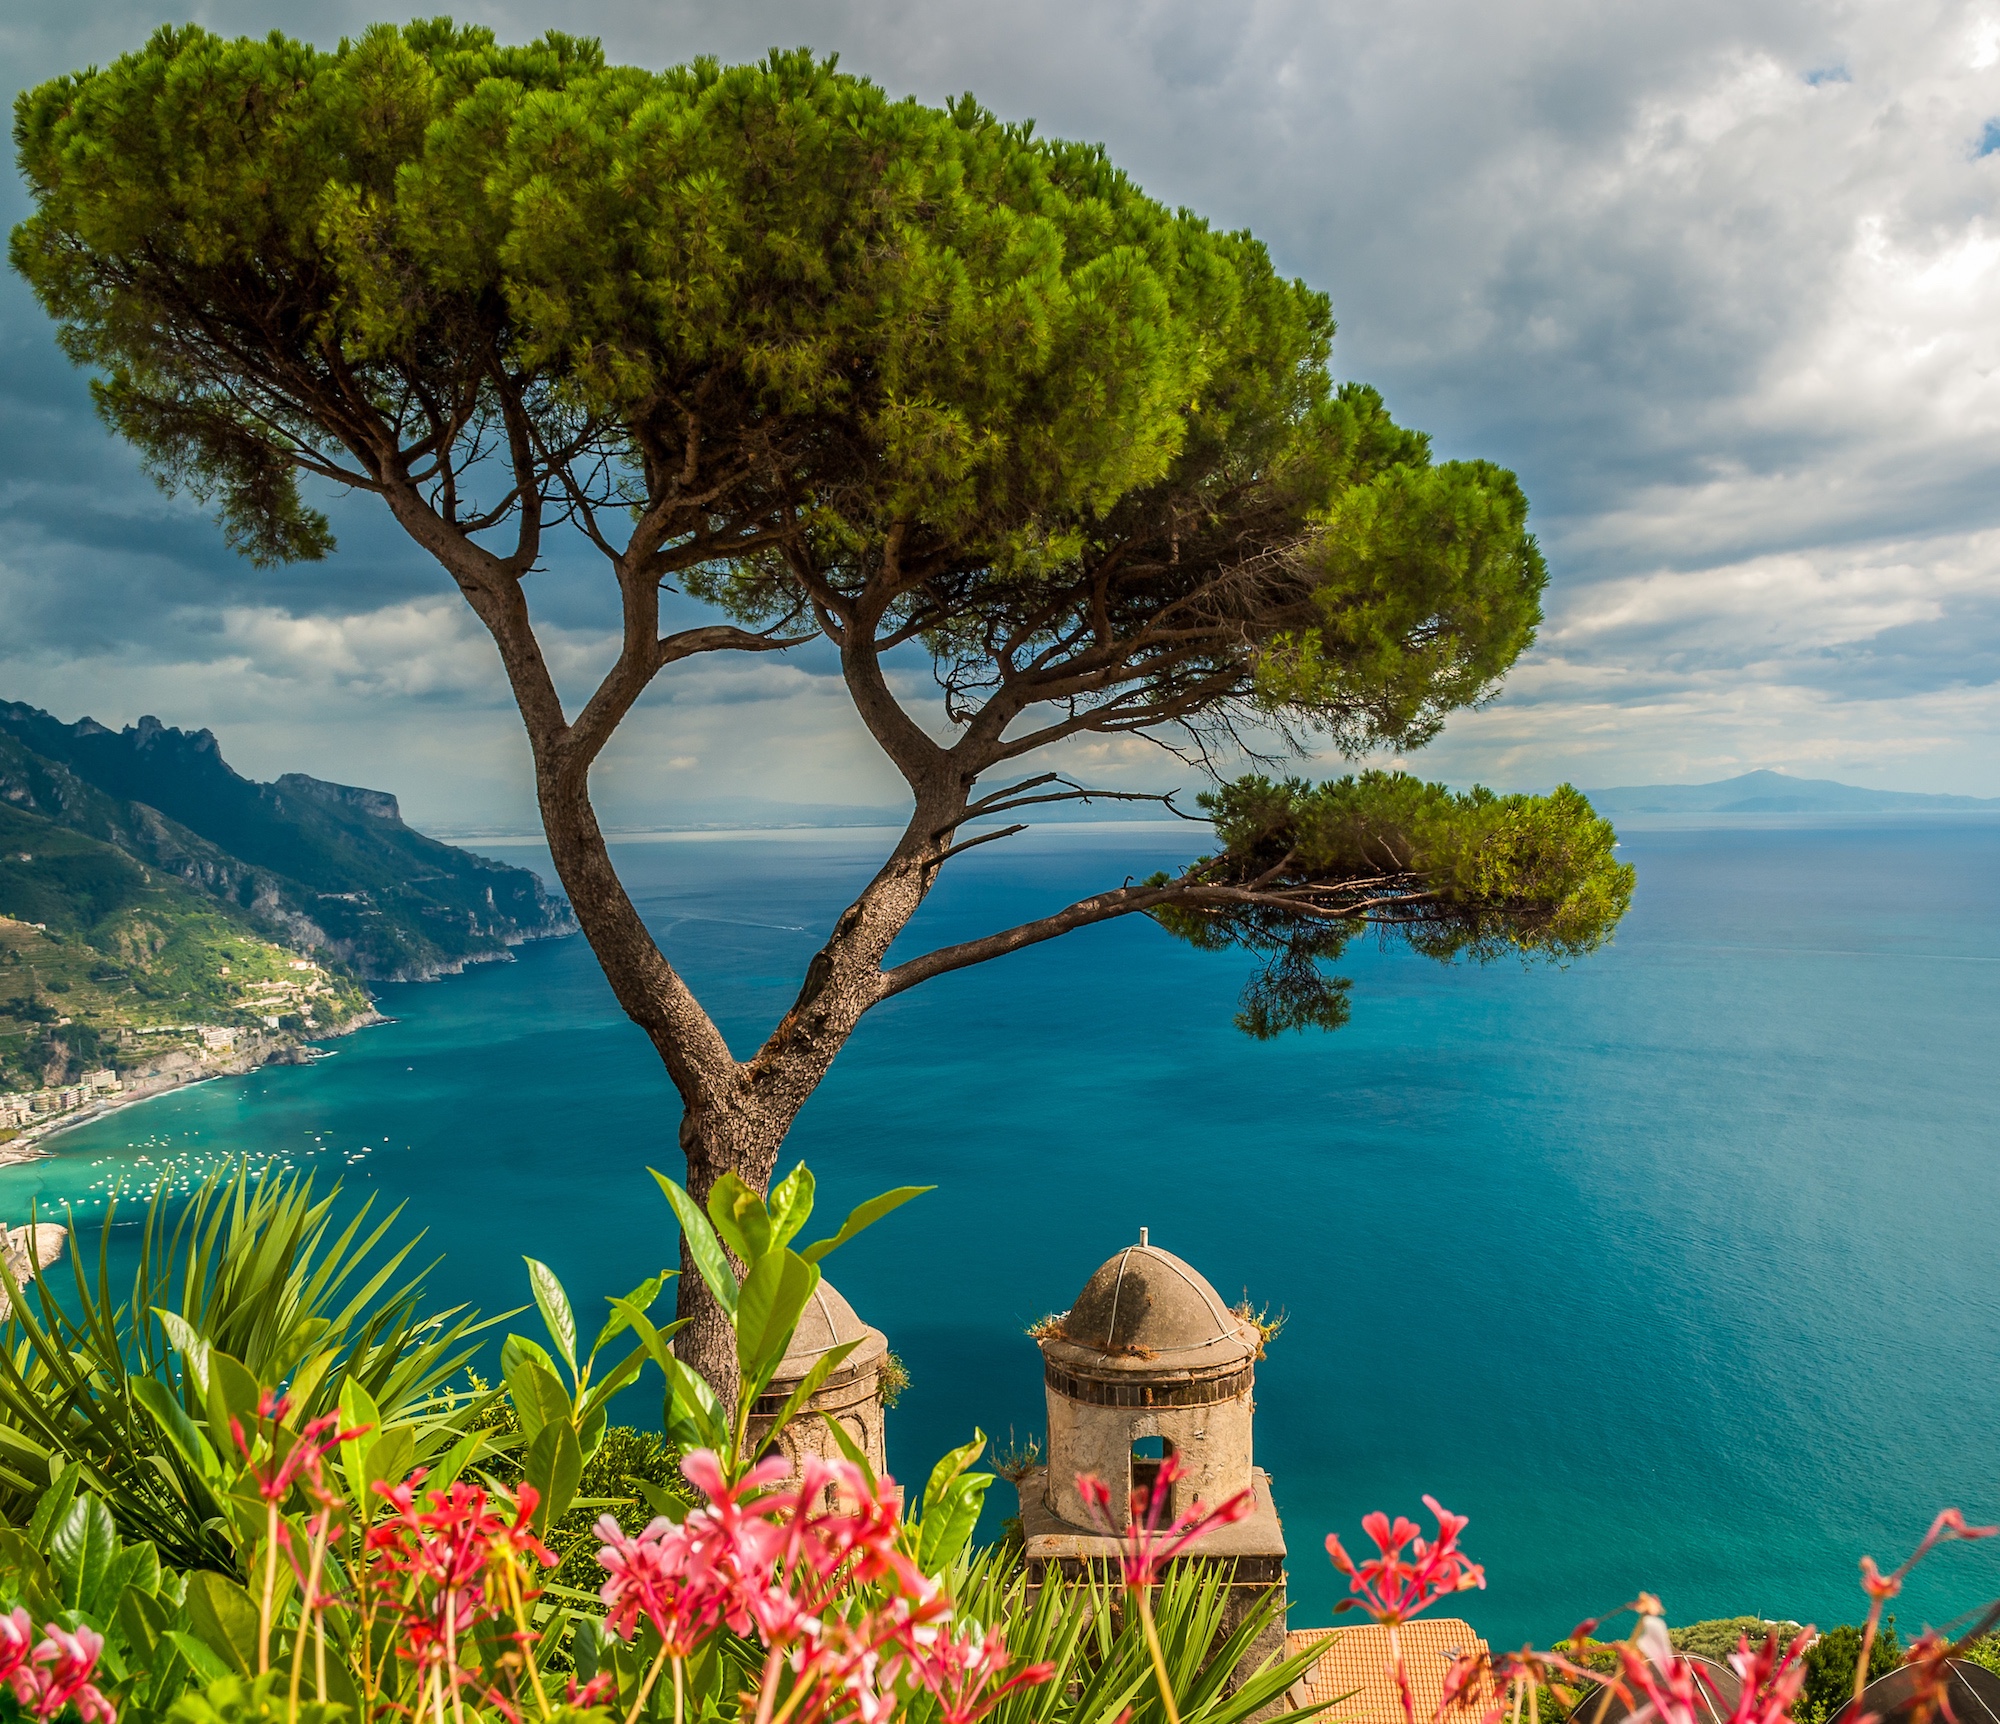 View from Ravello